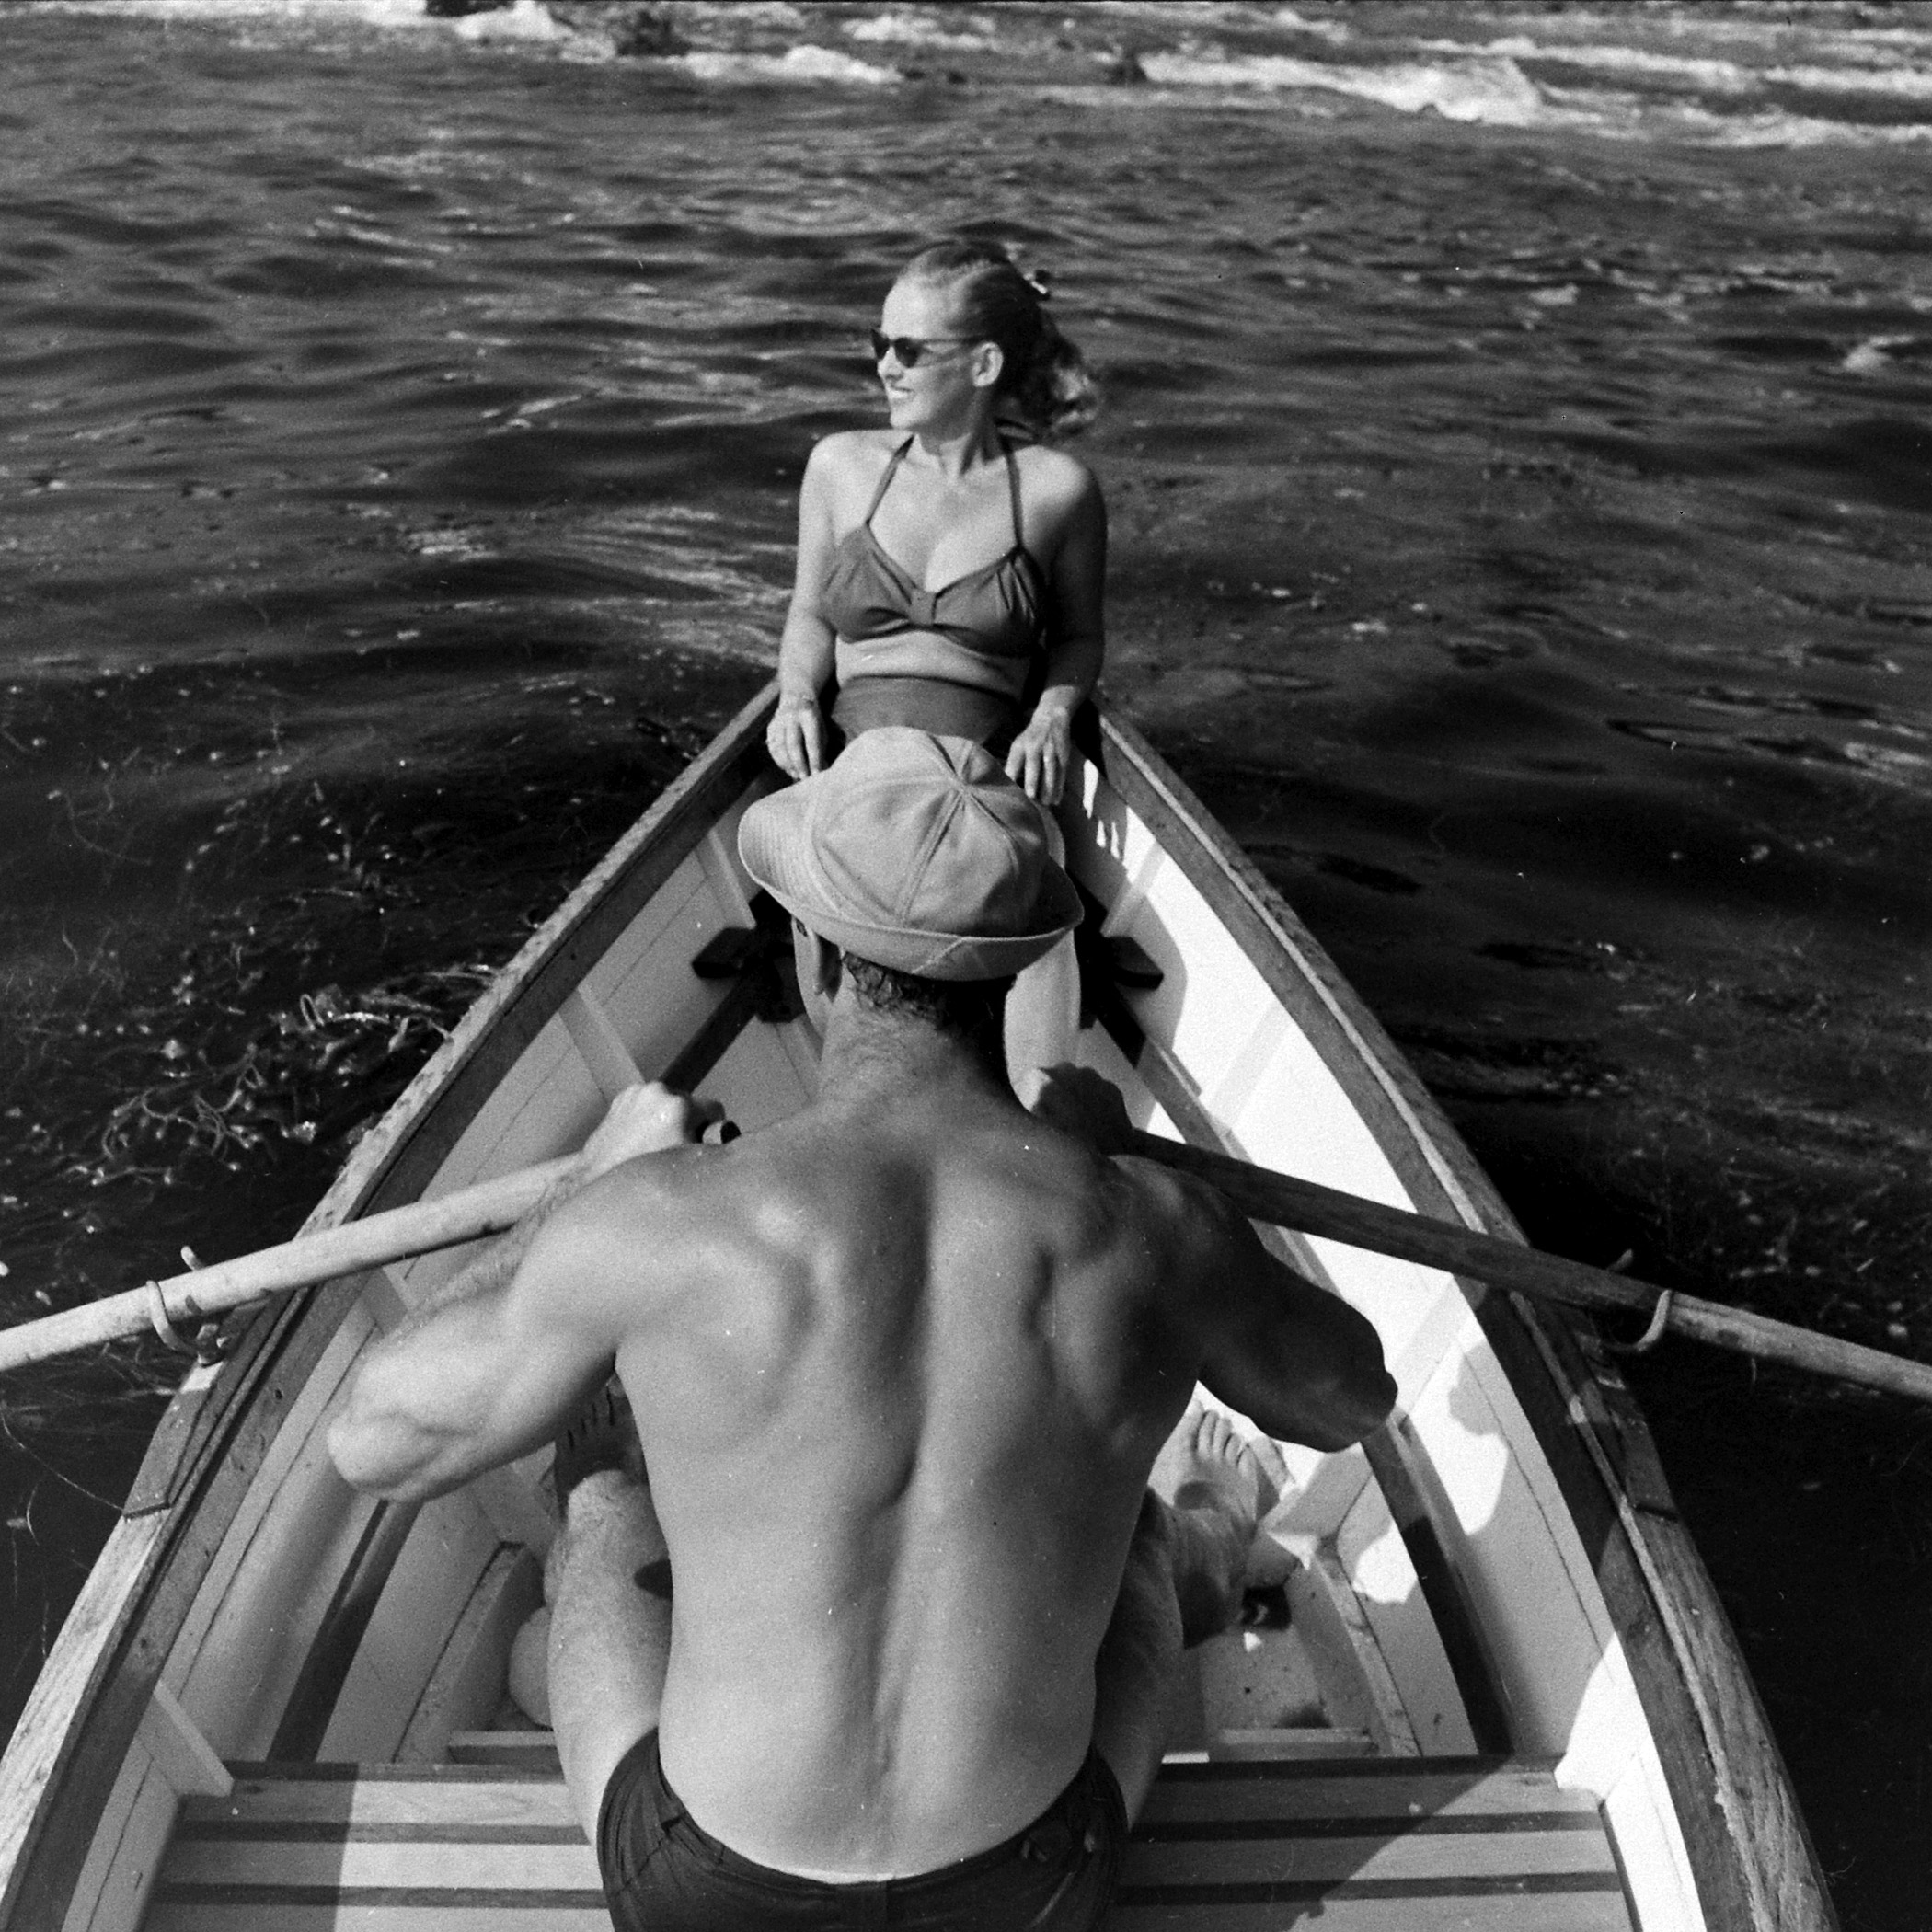 Bette Davis and her third husband William Grant Sherry boating in California, 1947.